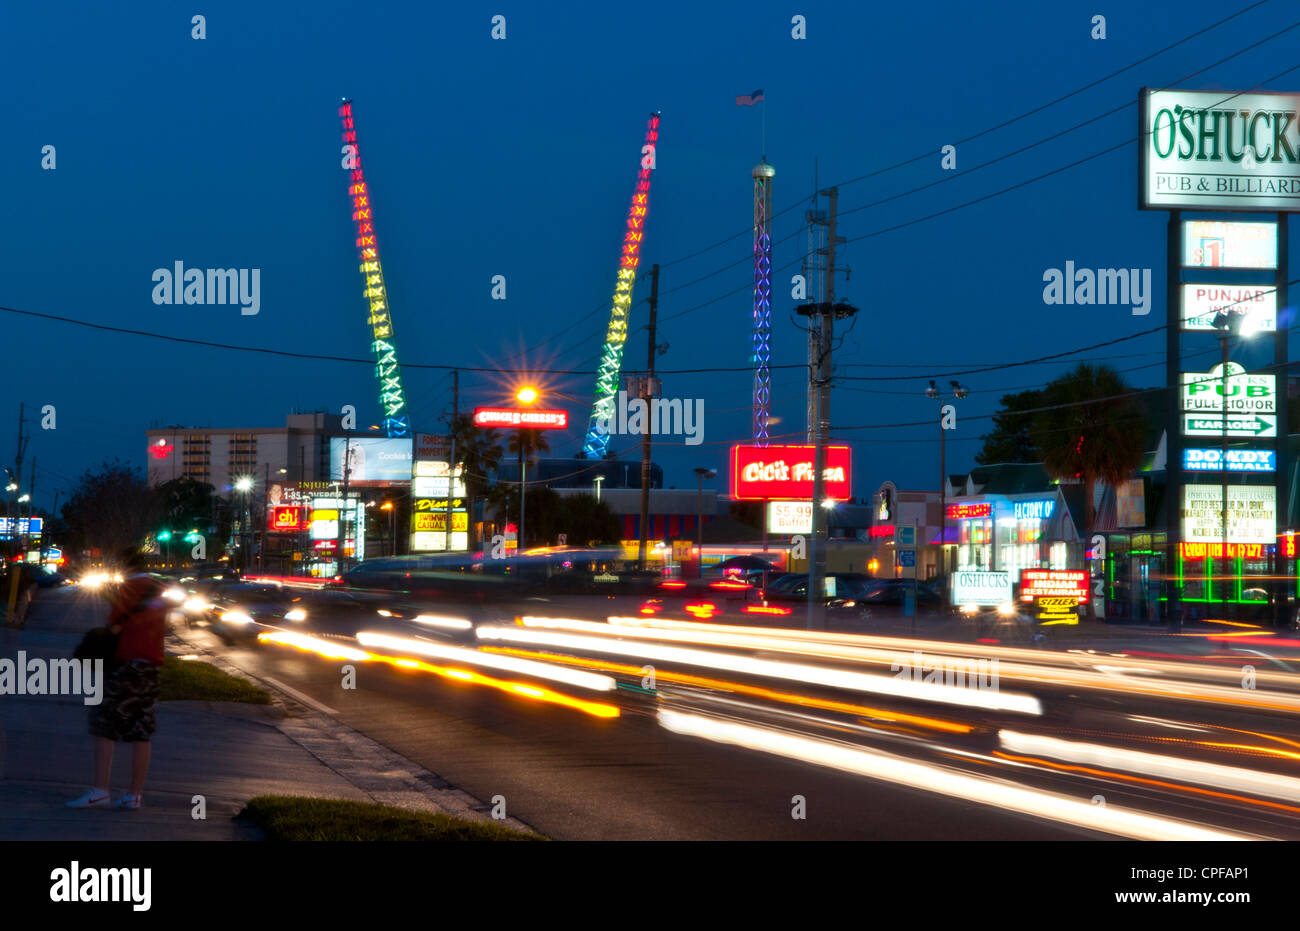 Twilight night shot of the tourist area of International Drive in Orlando Florida with colorful traffic and bungee jumping poles Stock Photo